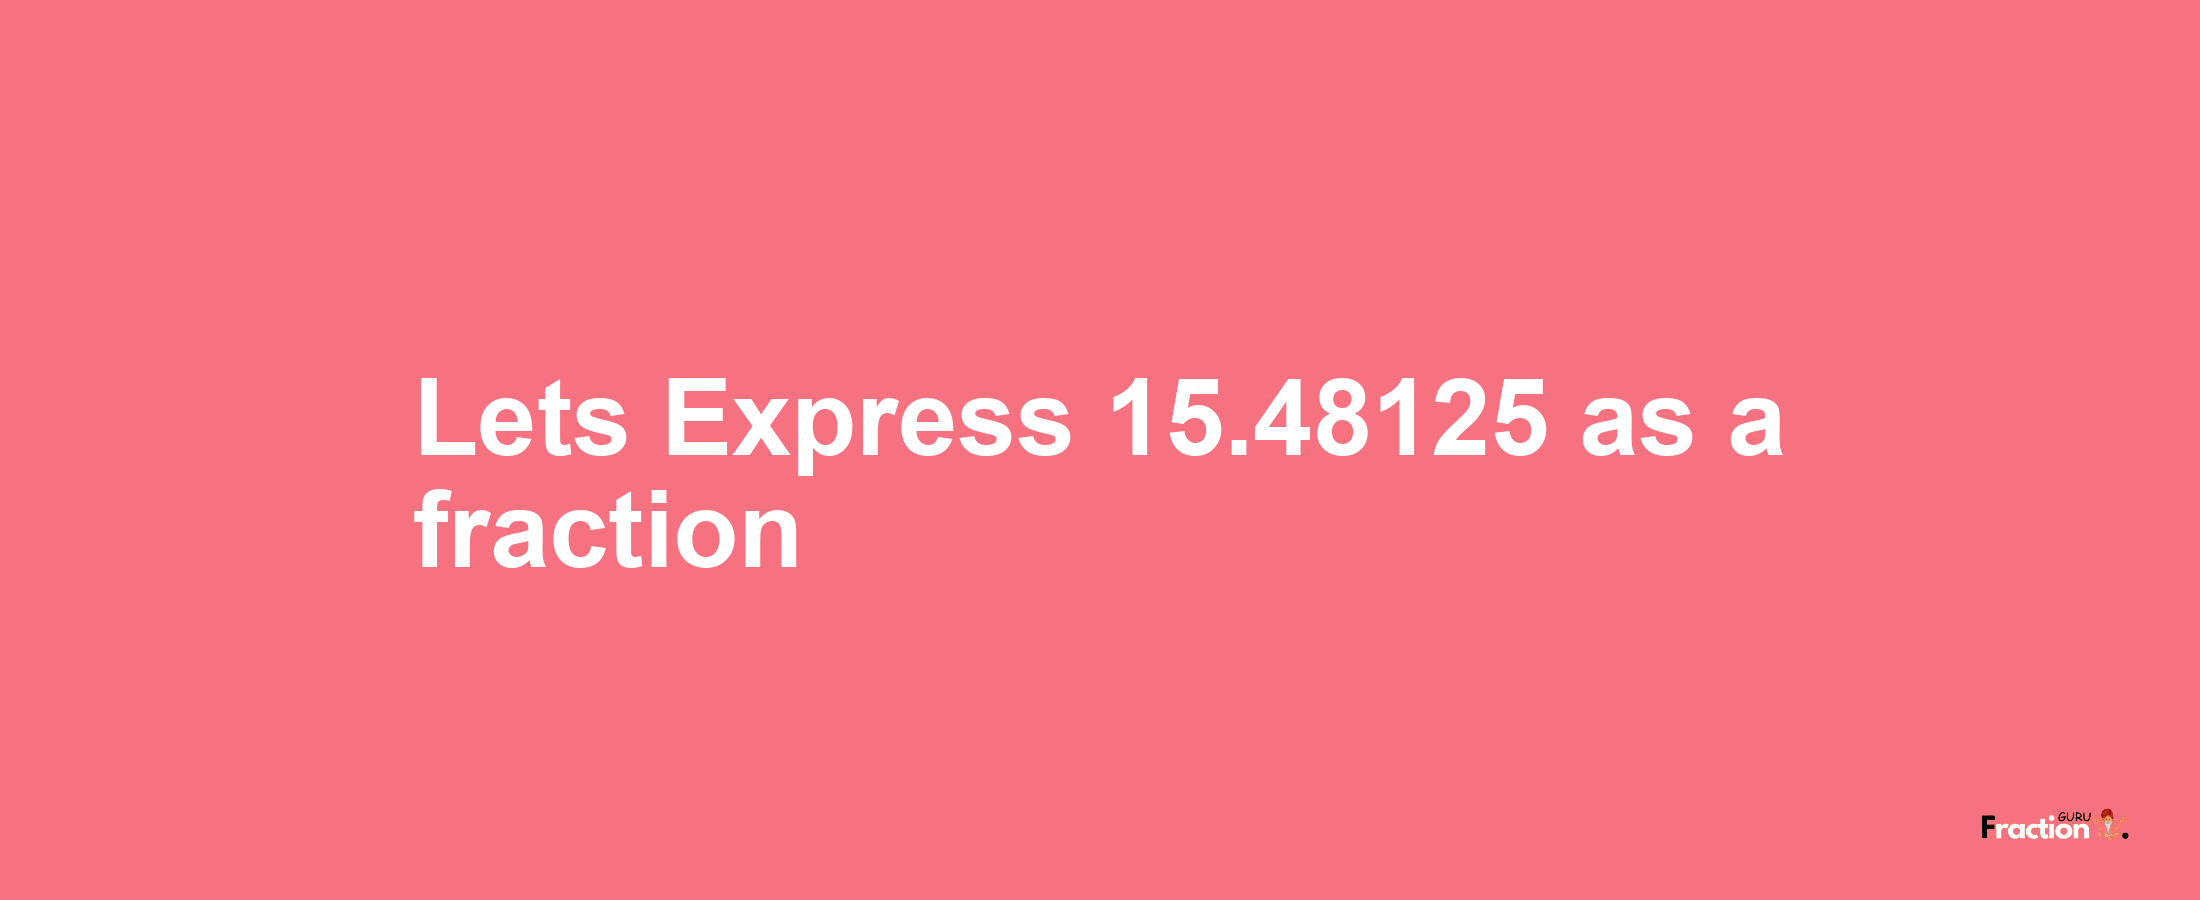 Lets Express 15.48125 as afraction